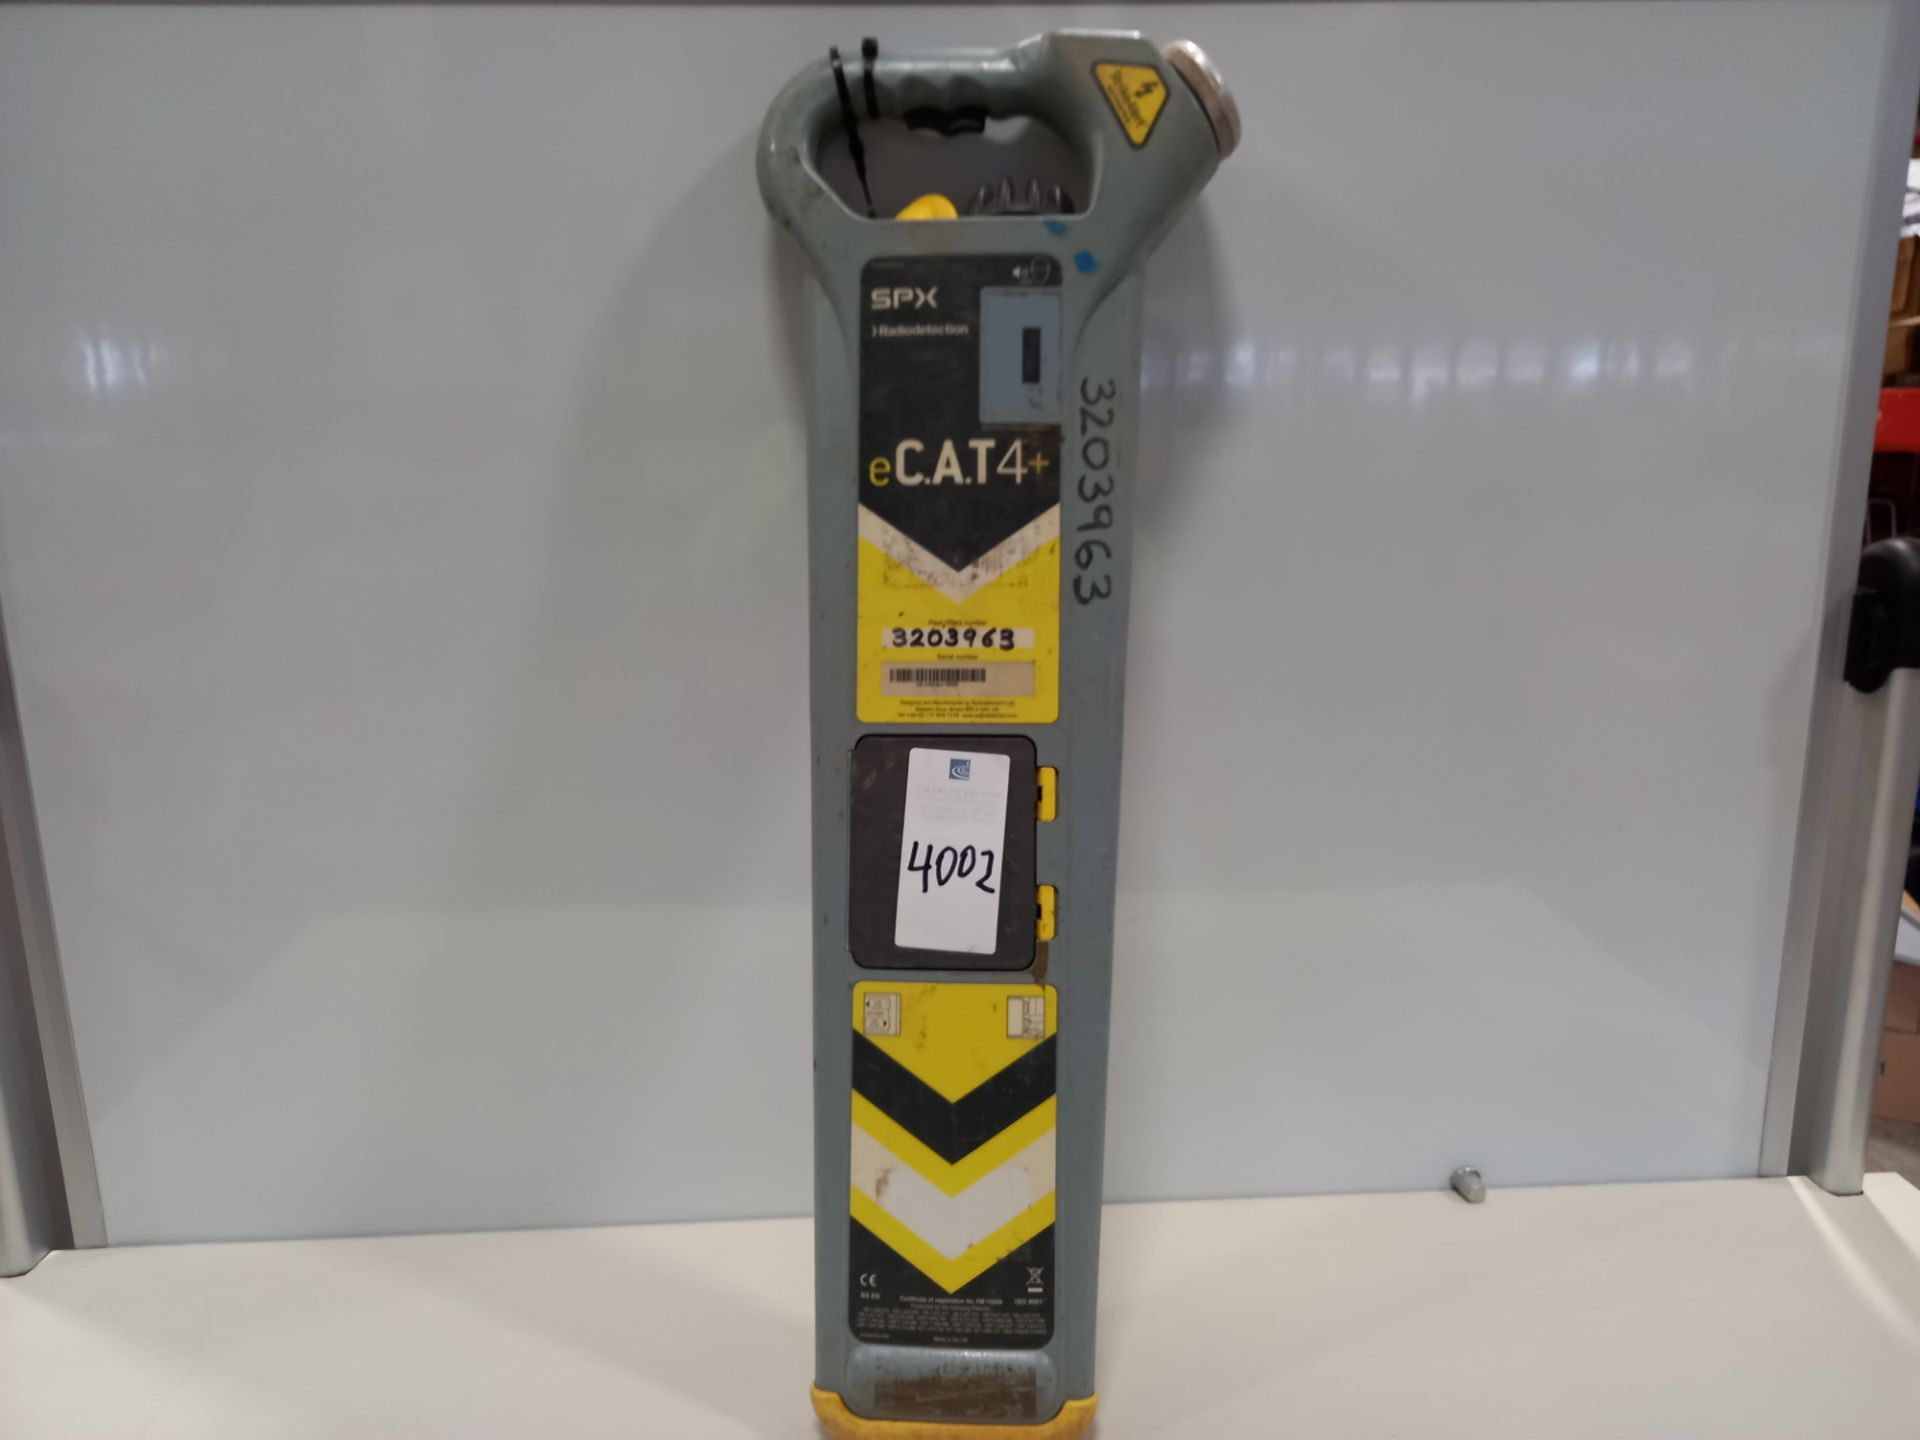 SPX CAT4 CABLE (RADIO) DETECTOR